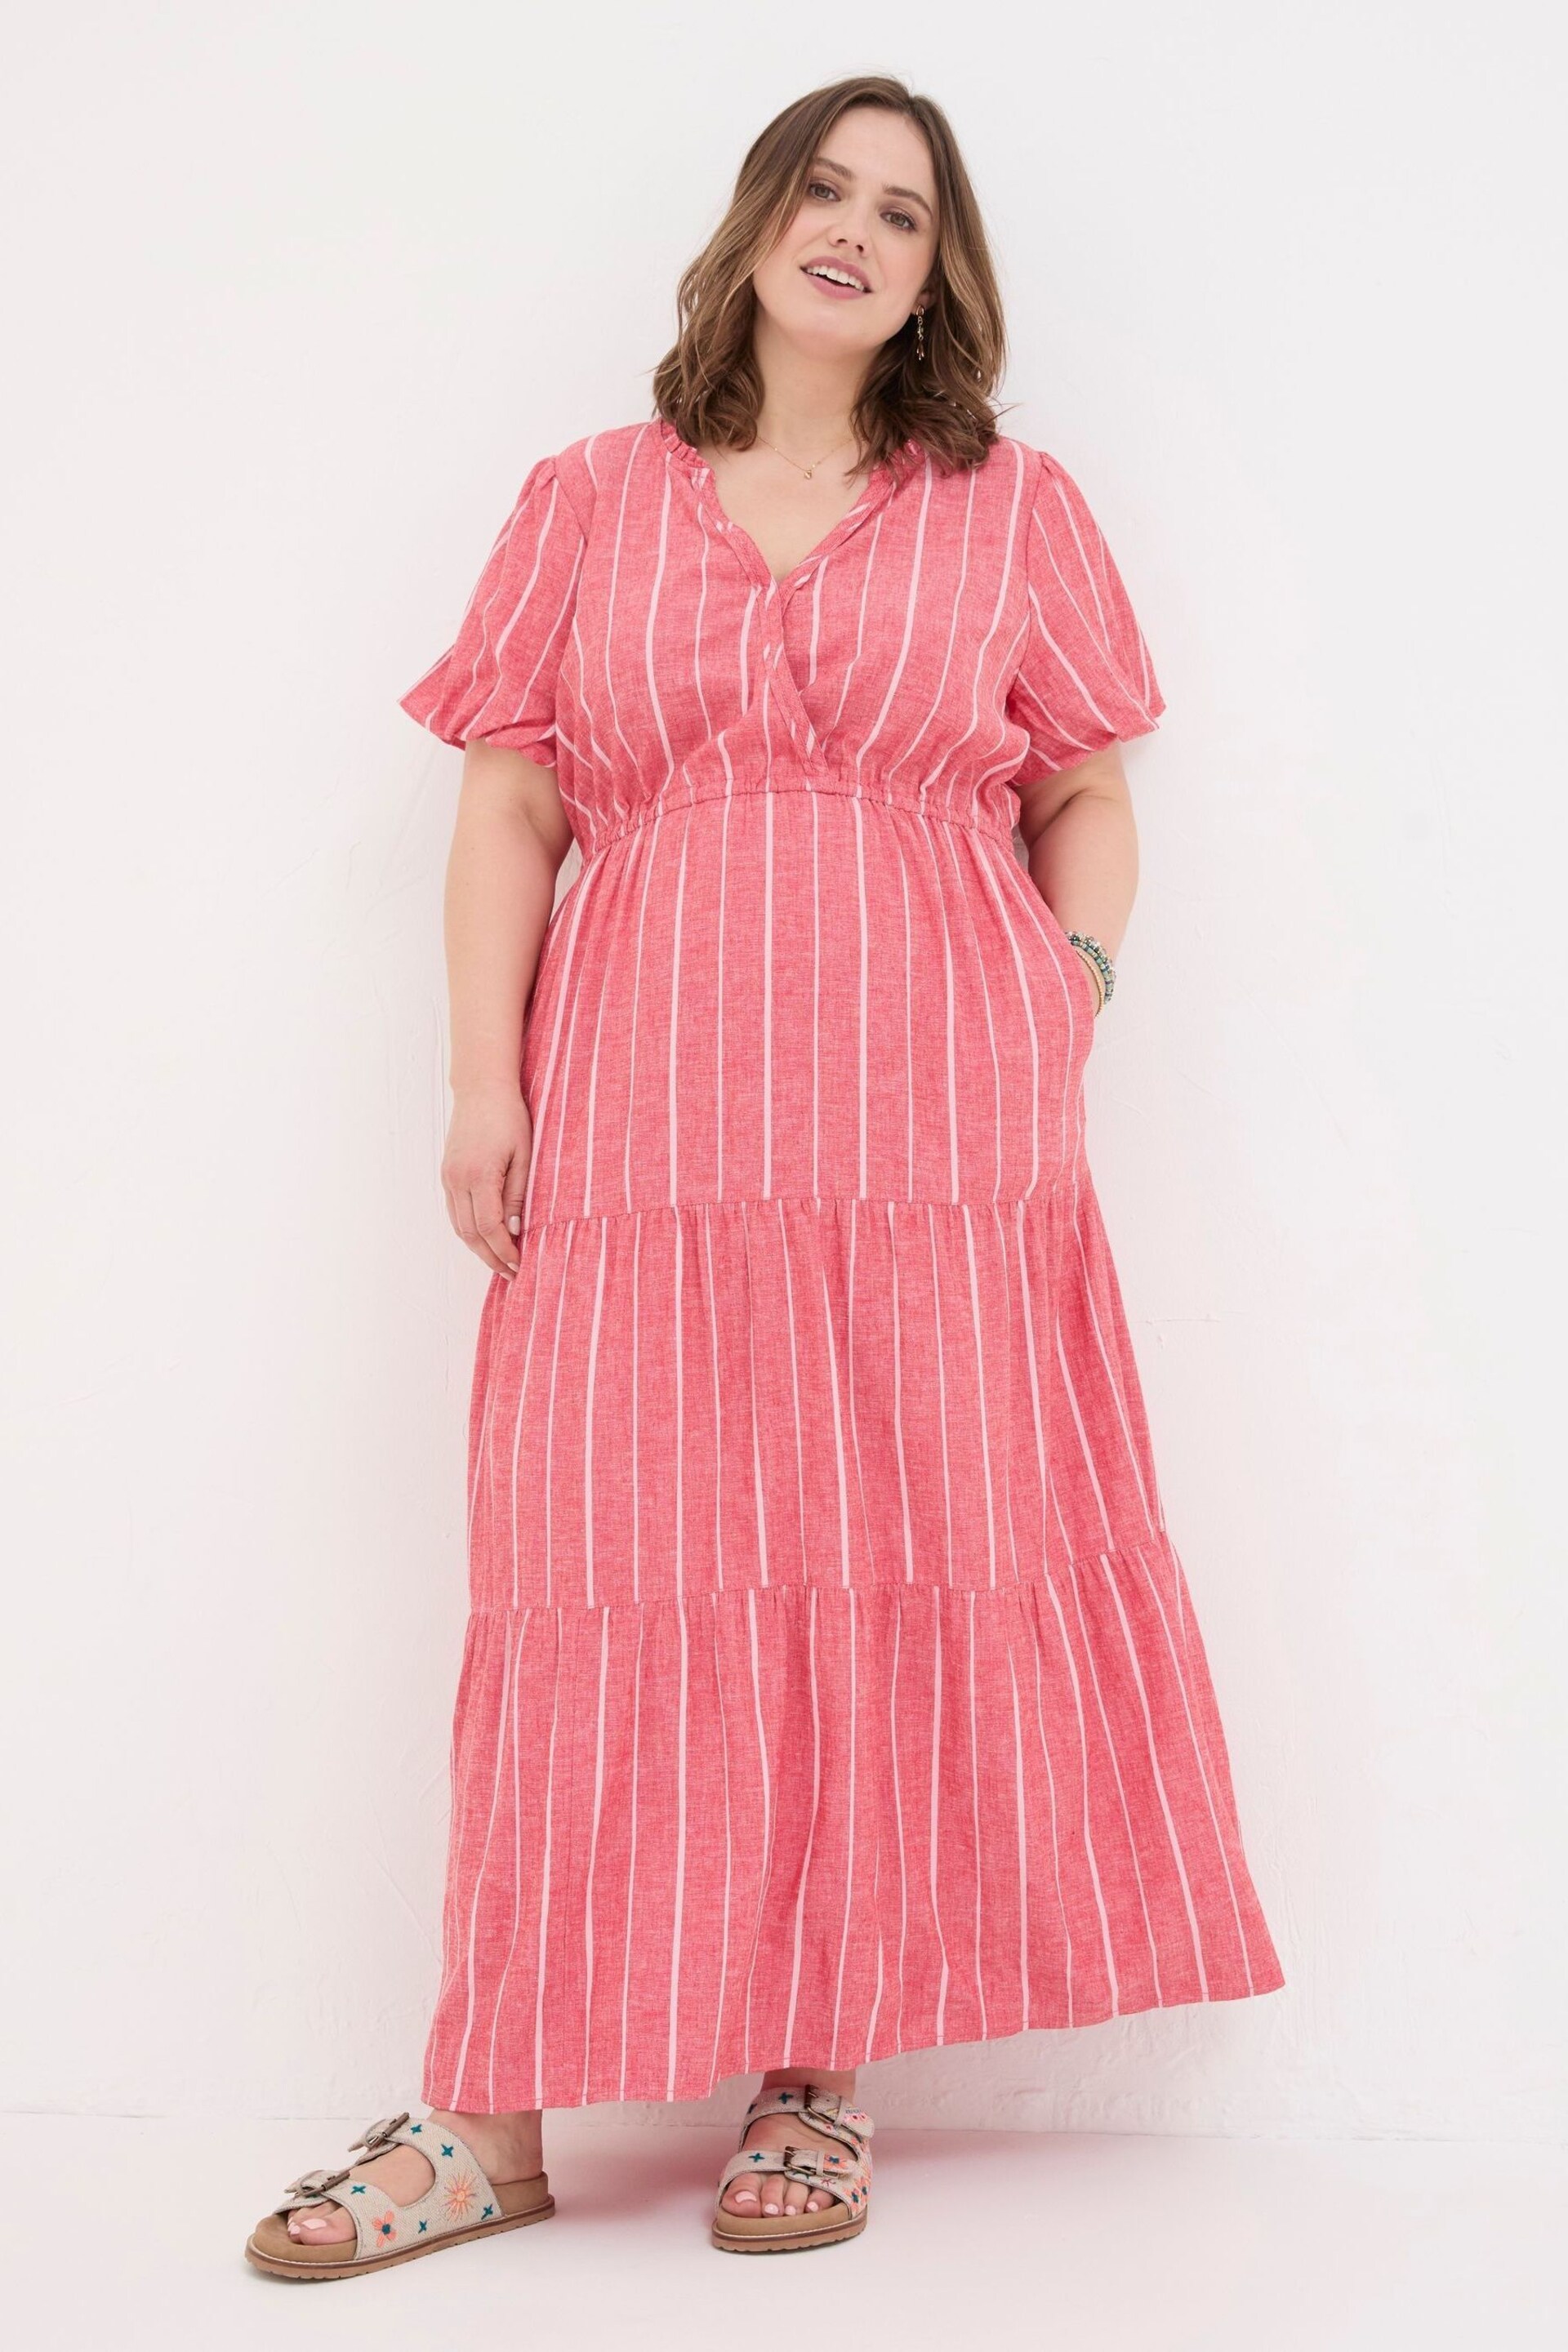 FatFace Red Stripe Maxi Dress - Image 5 of 6